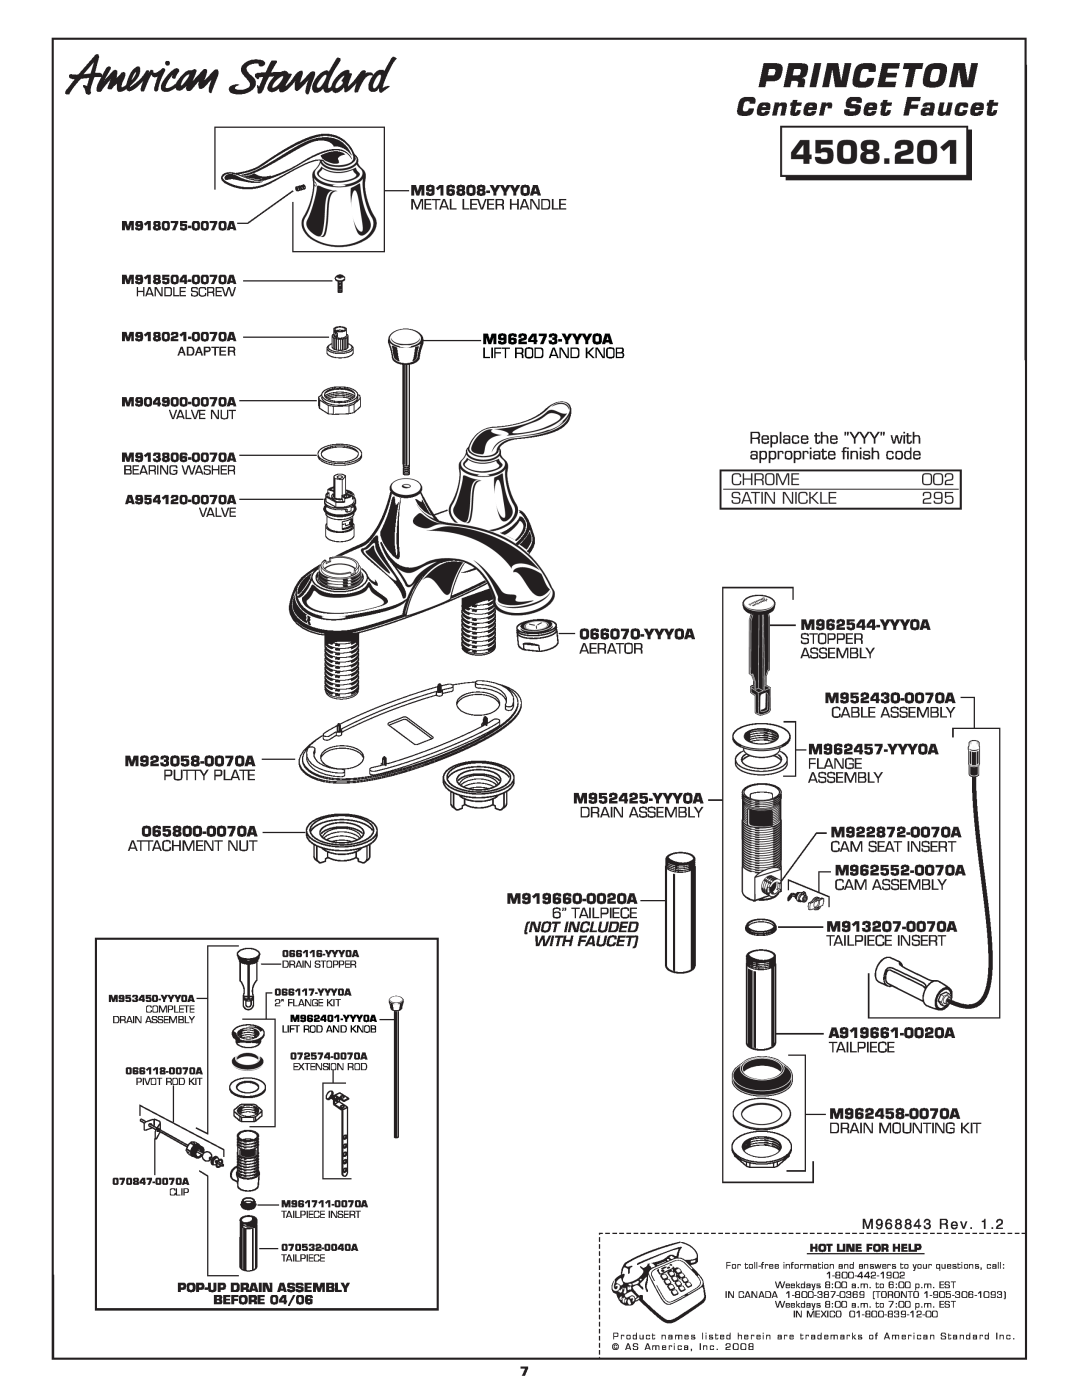 American Standard 4508.201 Princeton, Center Set Faucet, M962473-YYY0A, Lift Rod And Knob, Not Included, With Faucet 